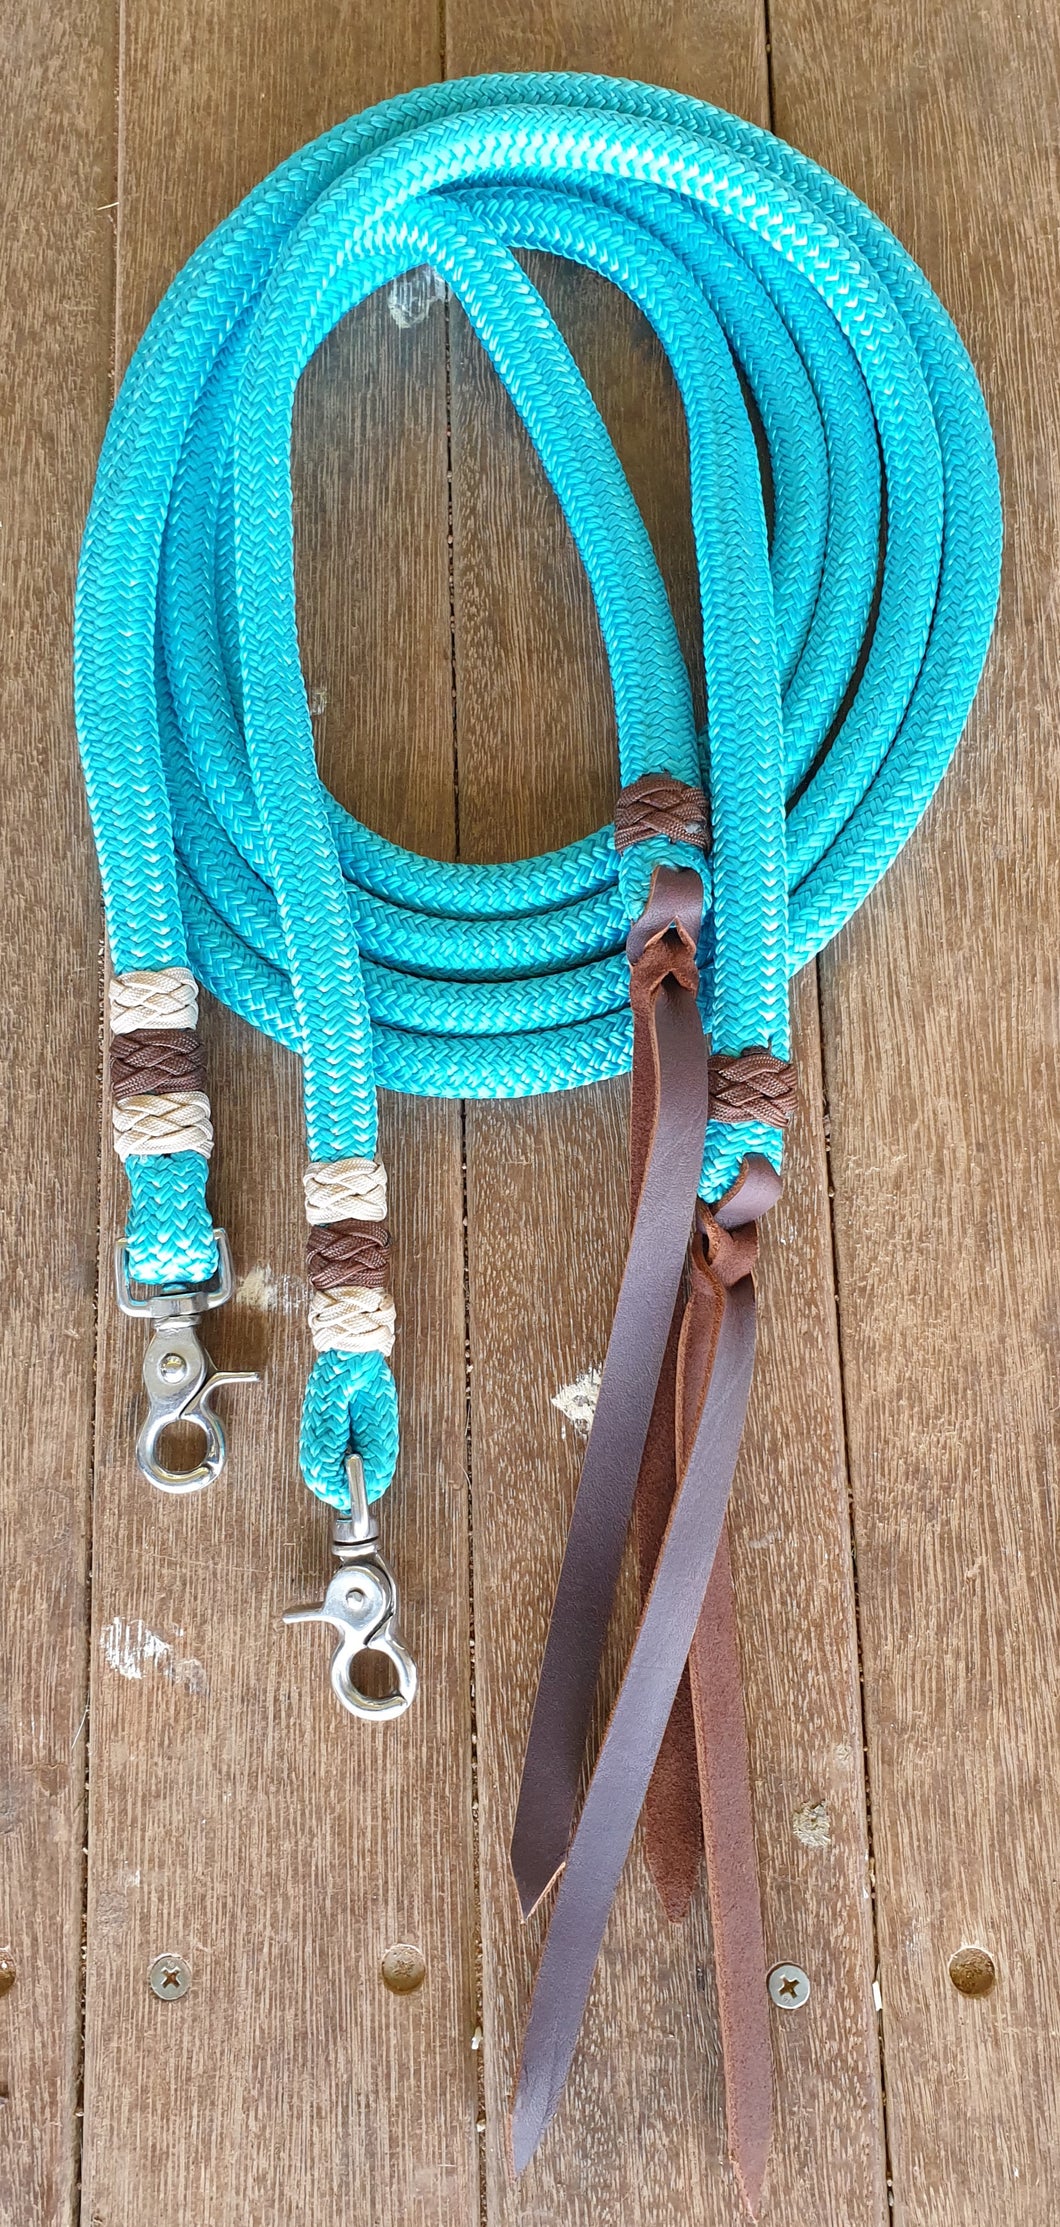 6.5 FT ROPE SPLIT REINS WITH DECORATIVE KNOTS